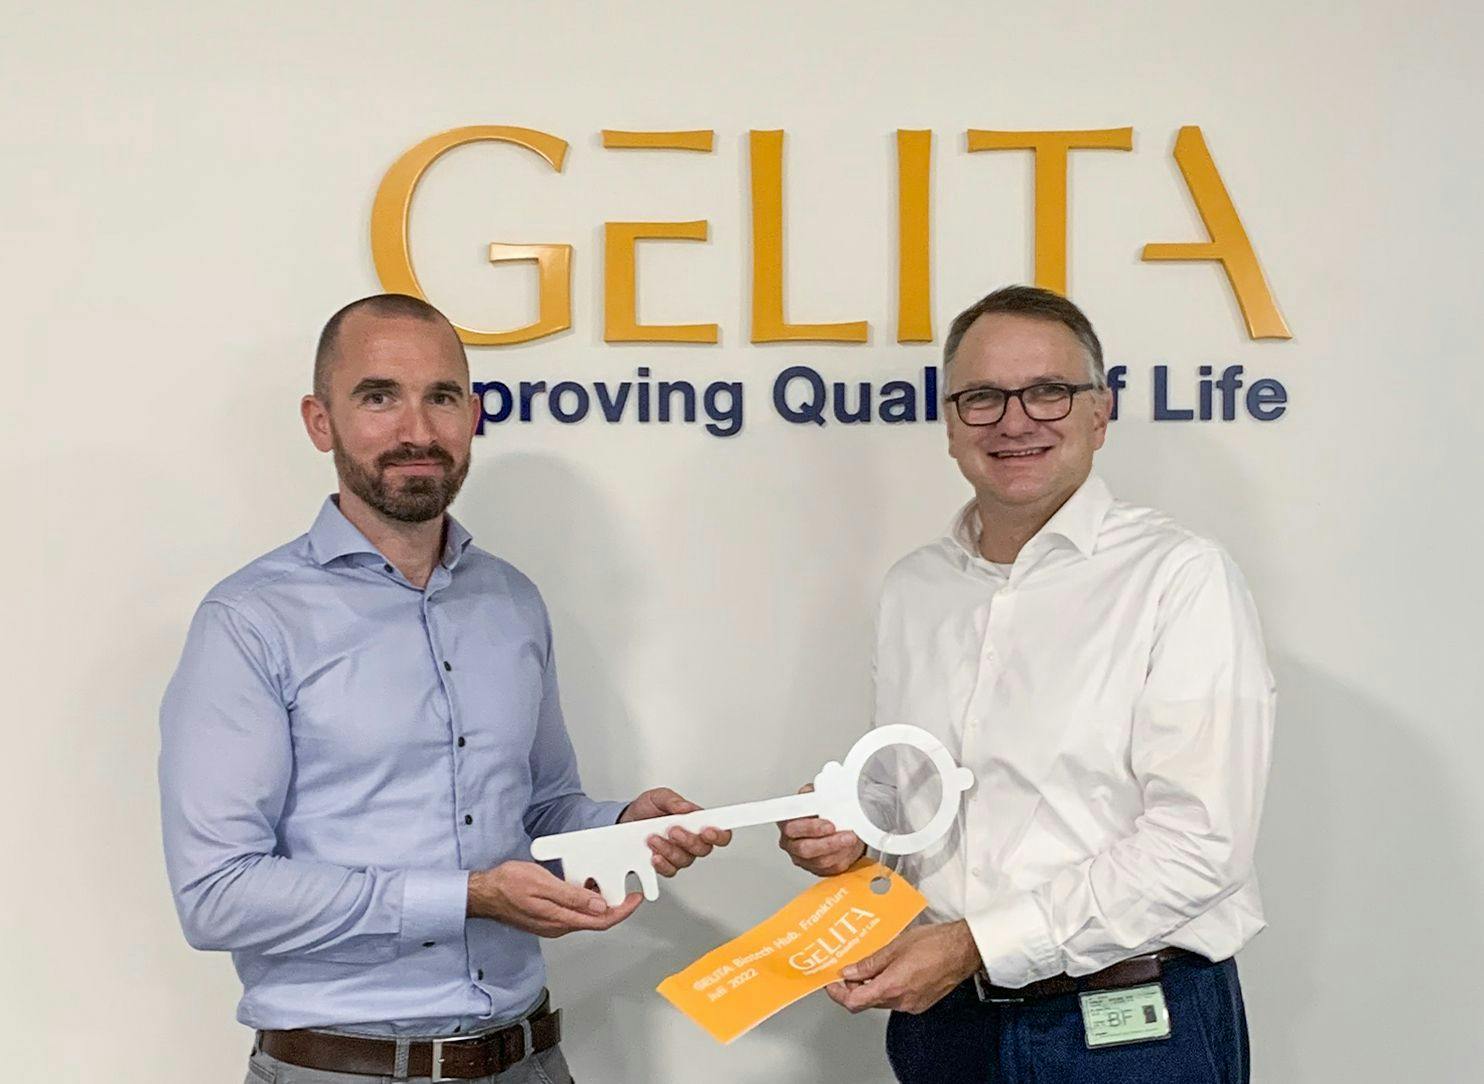 Gelita opens biotech hub to sustainably develop proteins for nutrition, cosmetics, and more